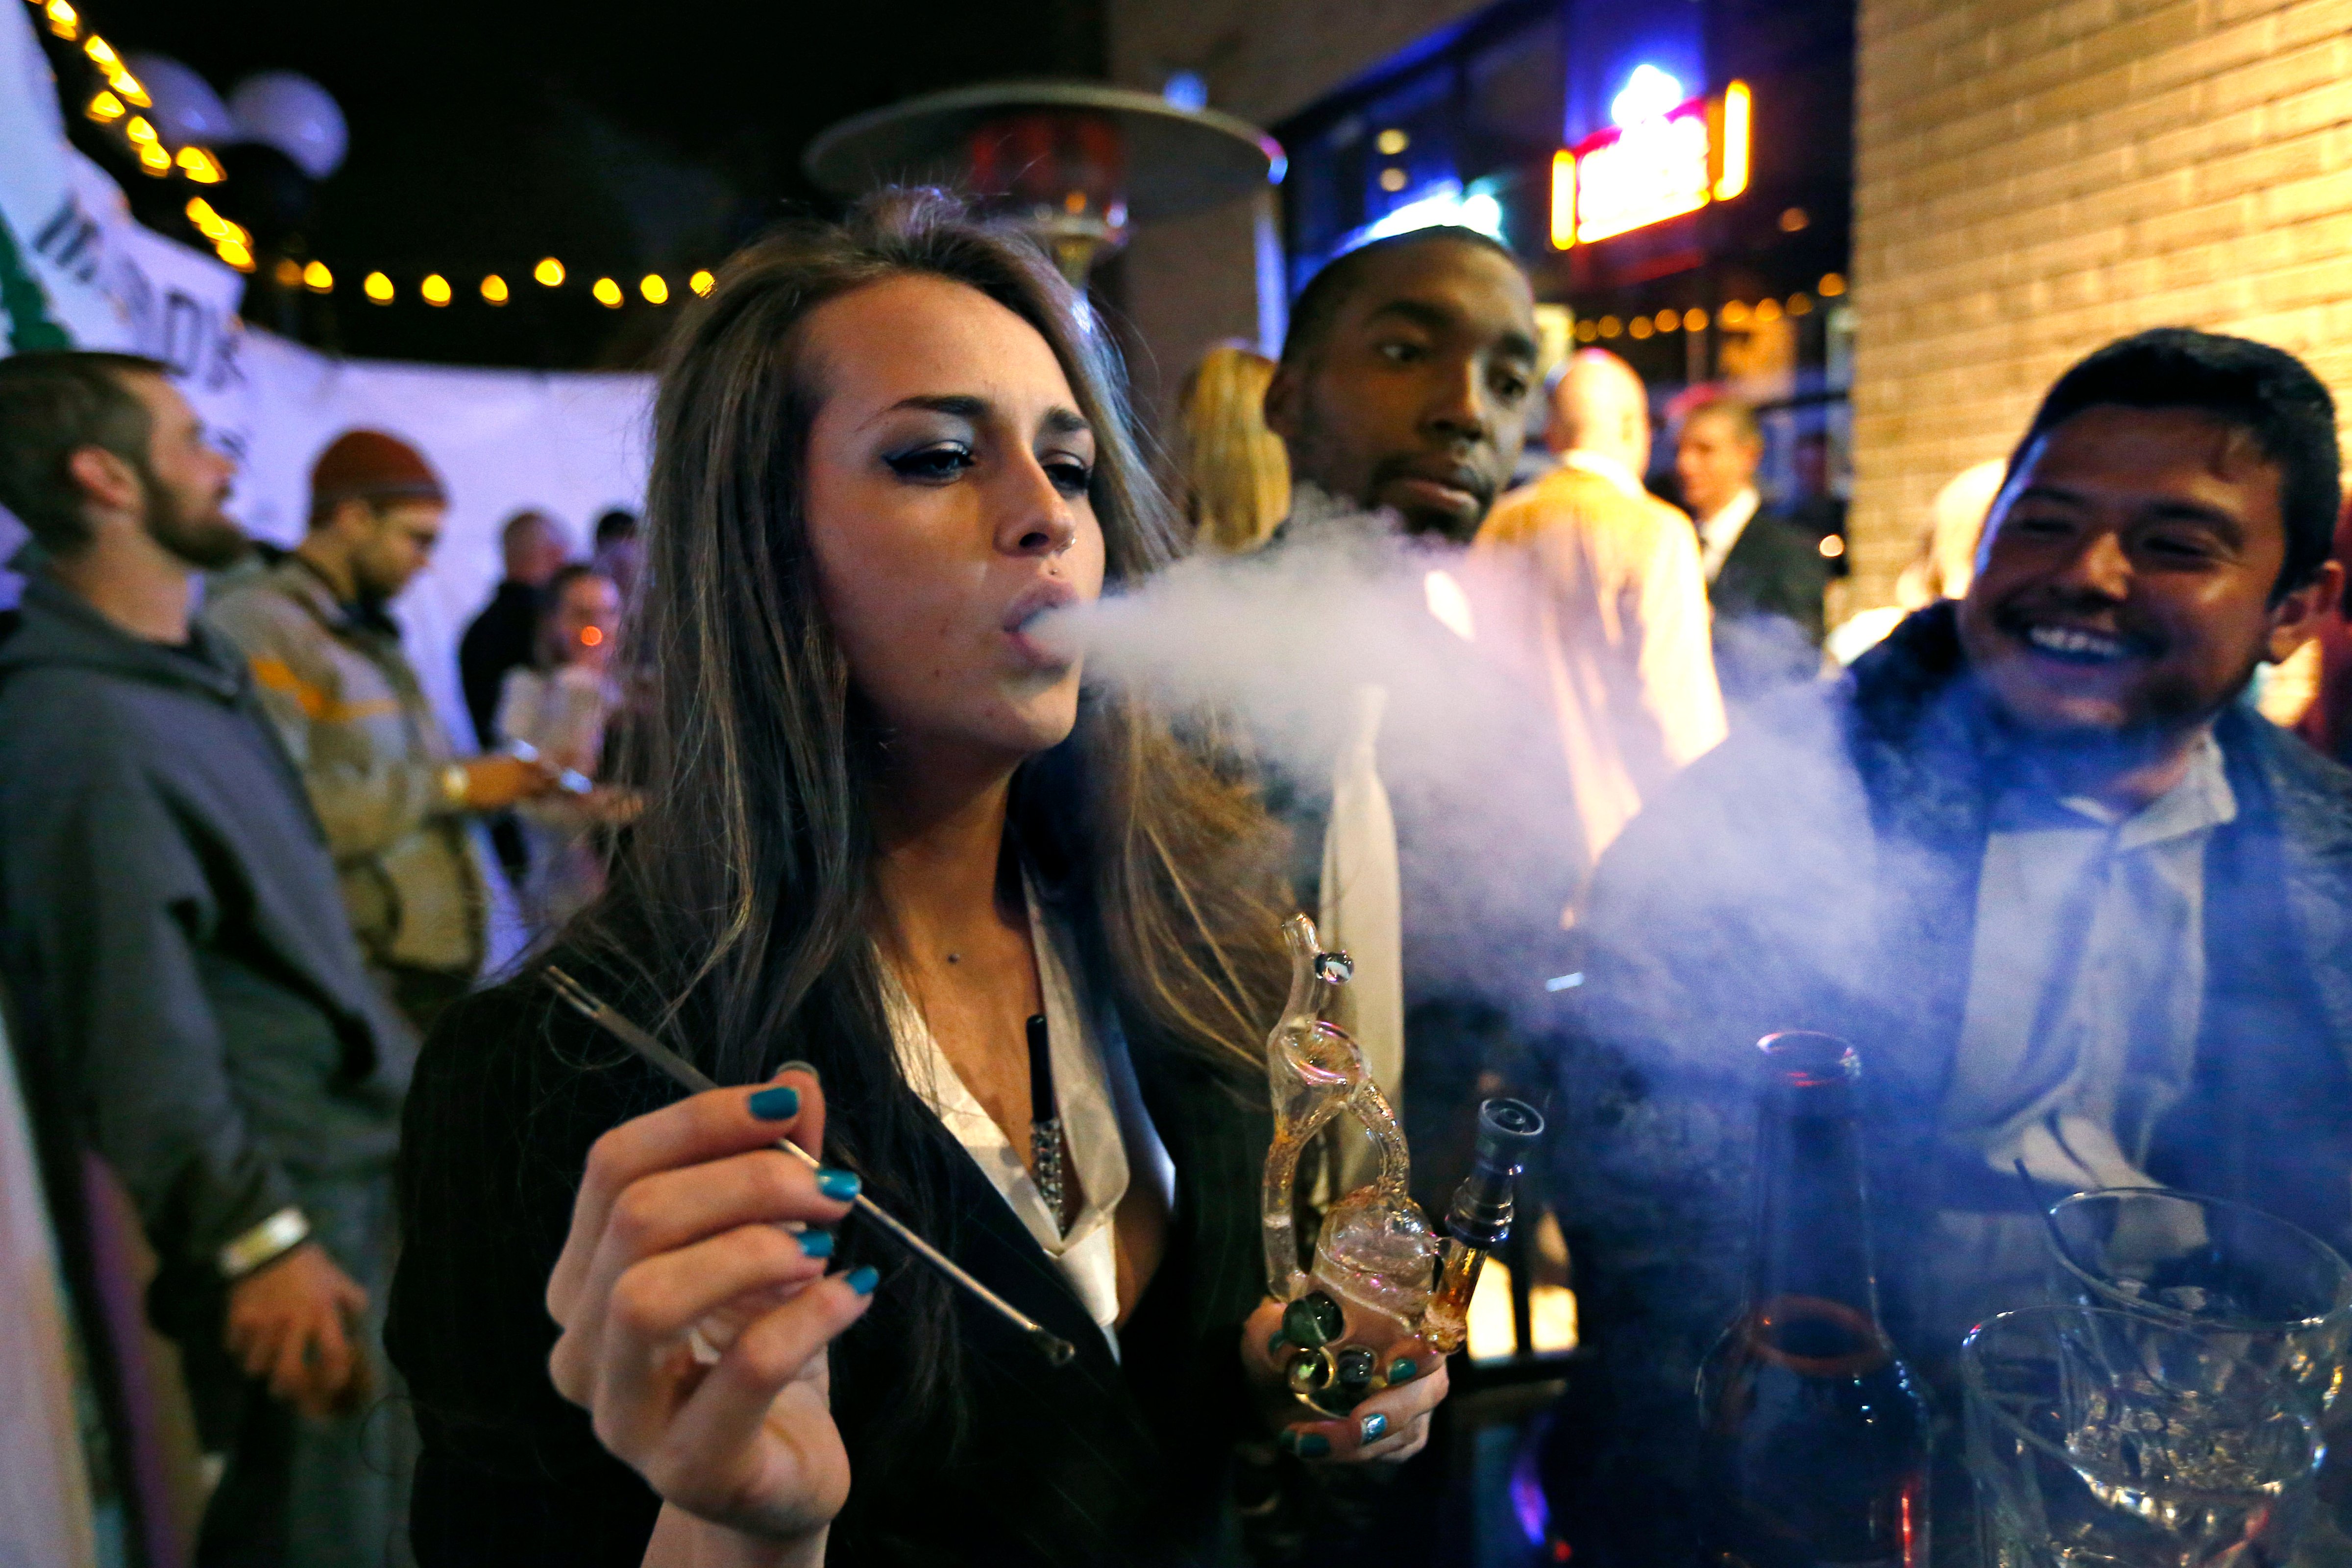 Partygoers smoke marijuana during a New Year's Eve party at a bar in Denver, celebrating the 2014 start of retail pot sales in Colorado. (Brennan Linsley—AP)